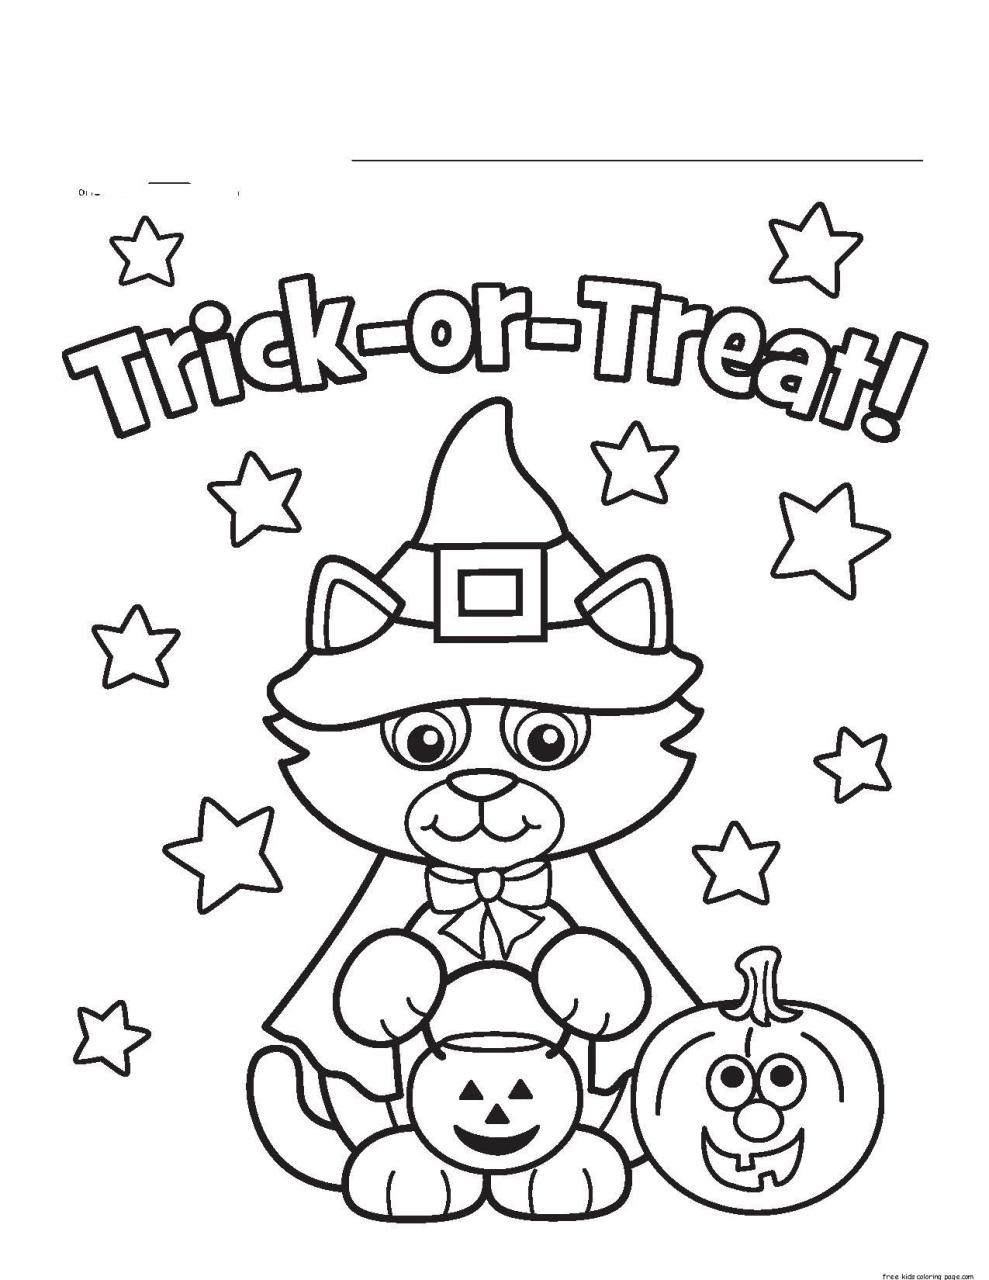 Printable Halloween Coloring Pages For Kids